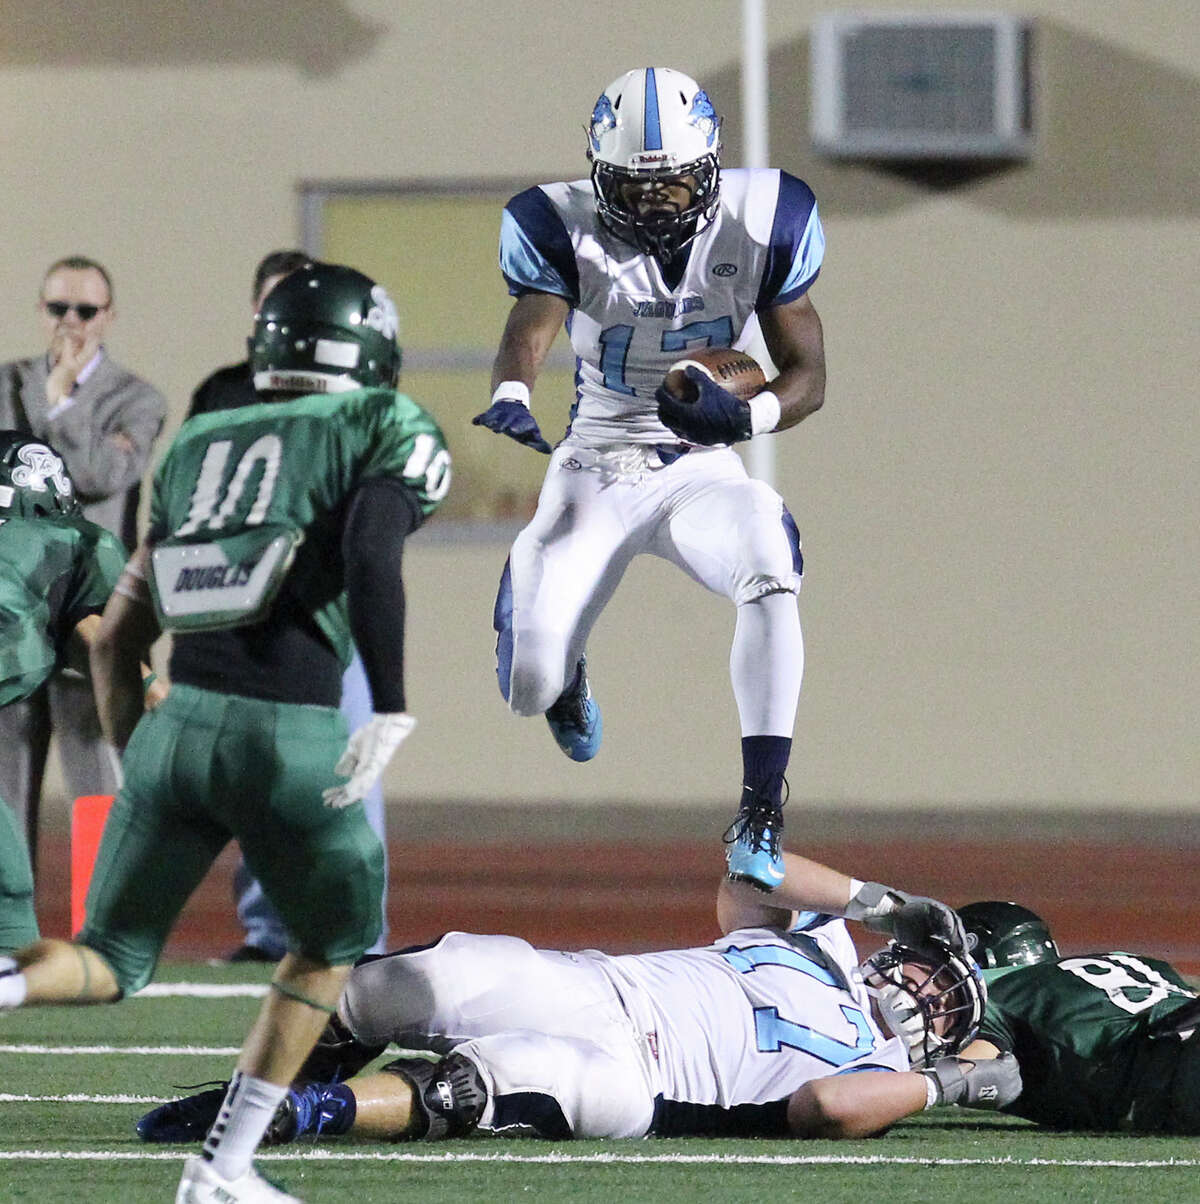 Johnson's Braedon Williams (17) leaps over players during the game against the Reagan Rattlers at Comalander Stadium on Friday, Oct. 25, 2013.